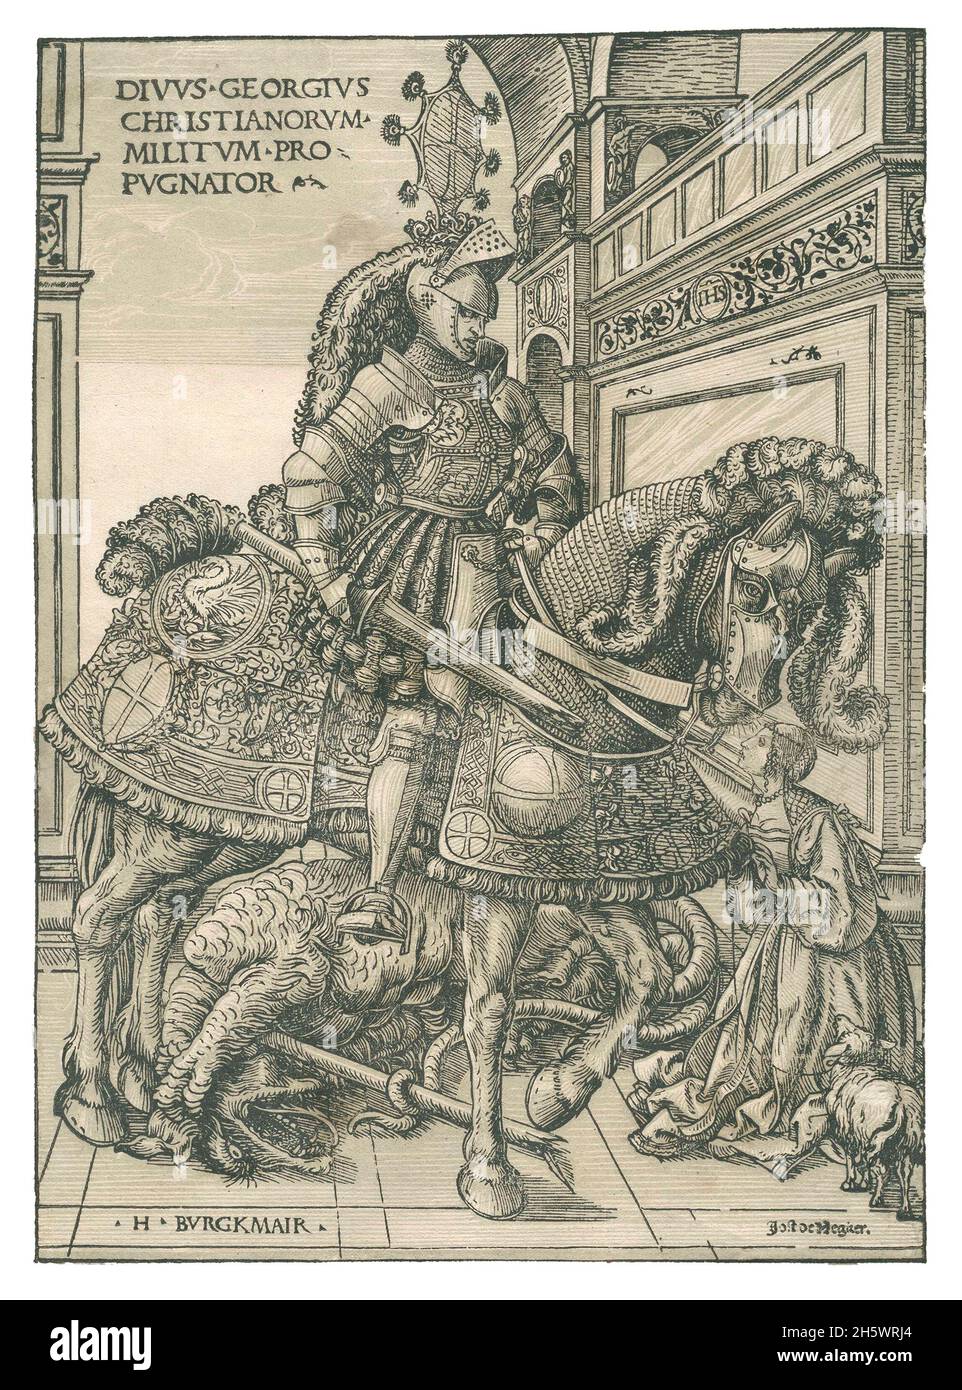 Saint George with the Princess and the Slain Dragon. This scene of St. George and the dragon is the earliest known chiaroscuro woodcut. This print was signed by Hans Burgkmair from Augsburg and the block-cutter Jost de Negker from Antwerp. 1508  An optimised and enhanced digital version of an historical print. Stock Photo